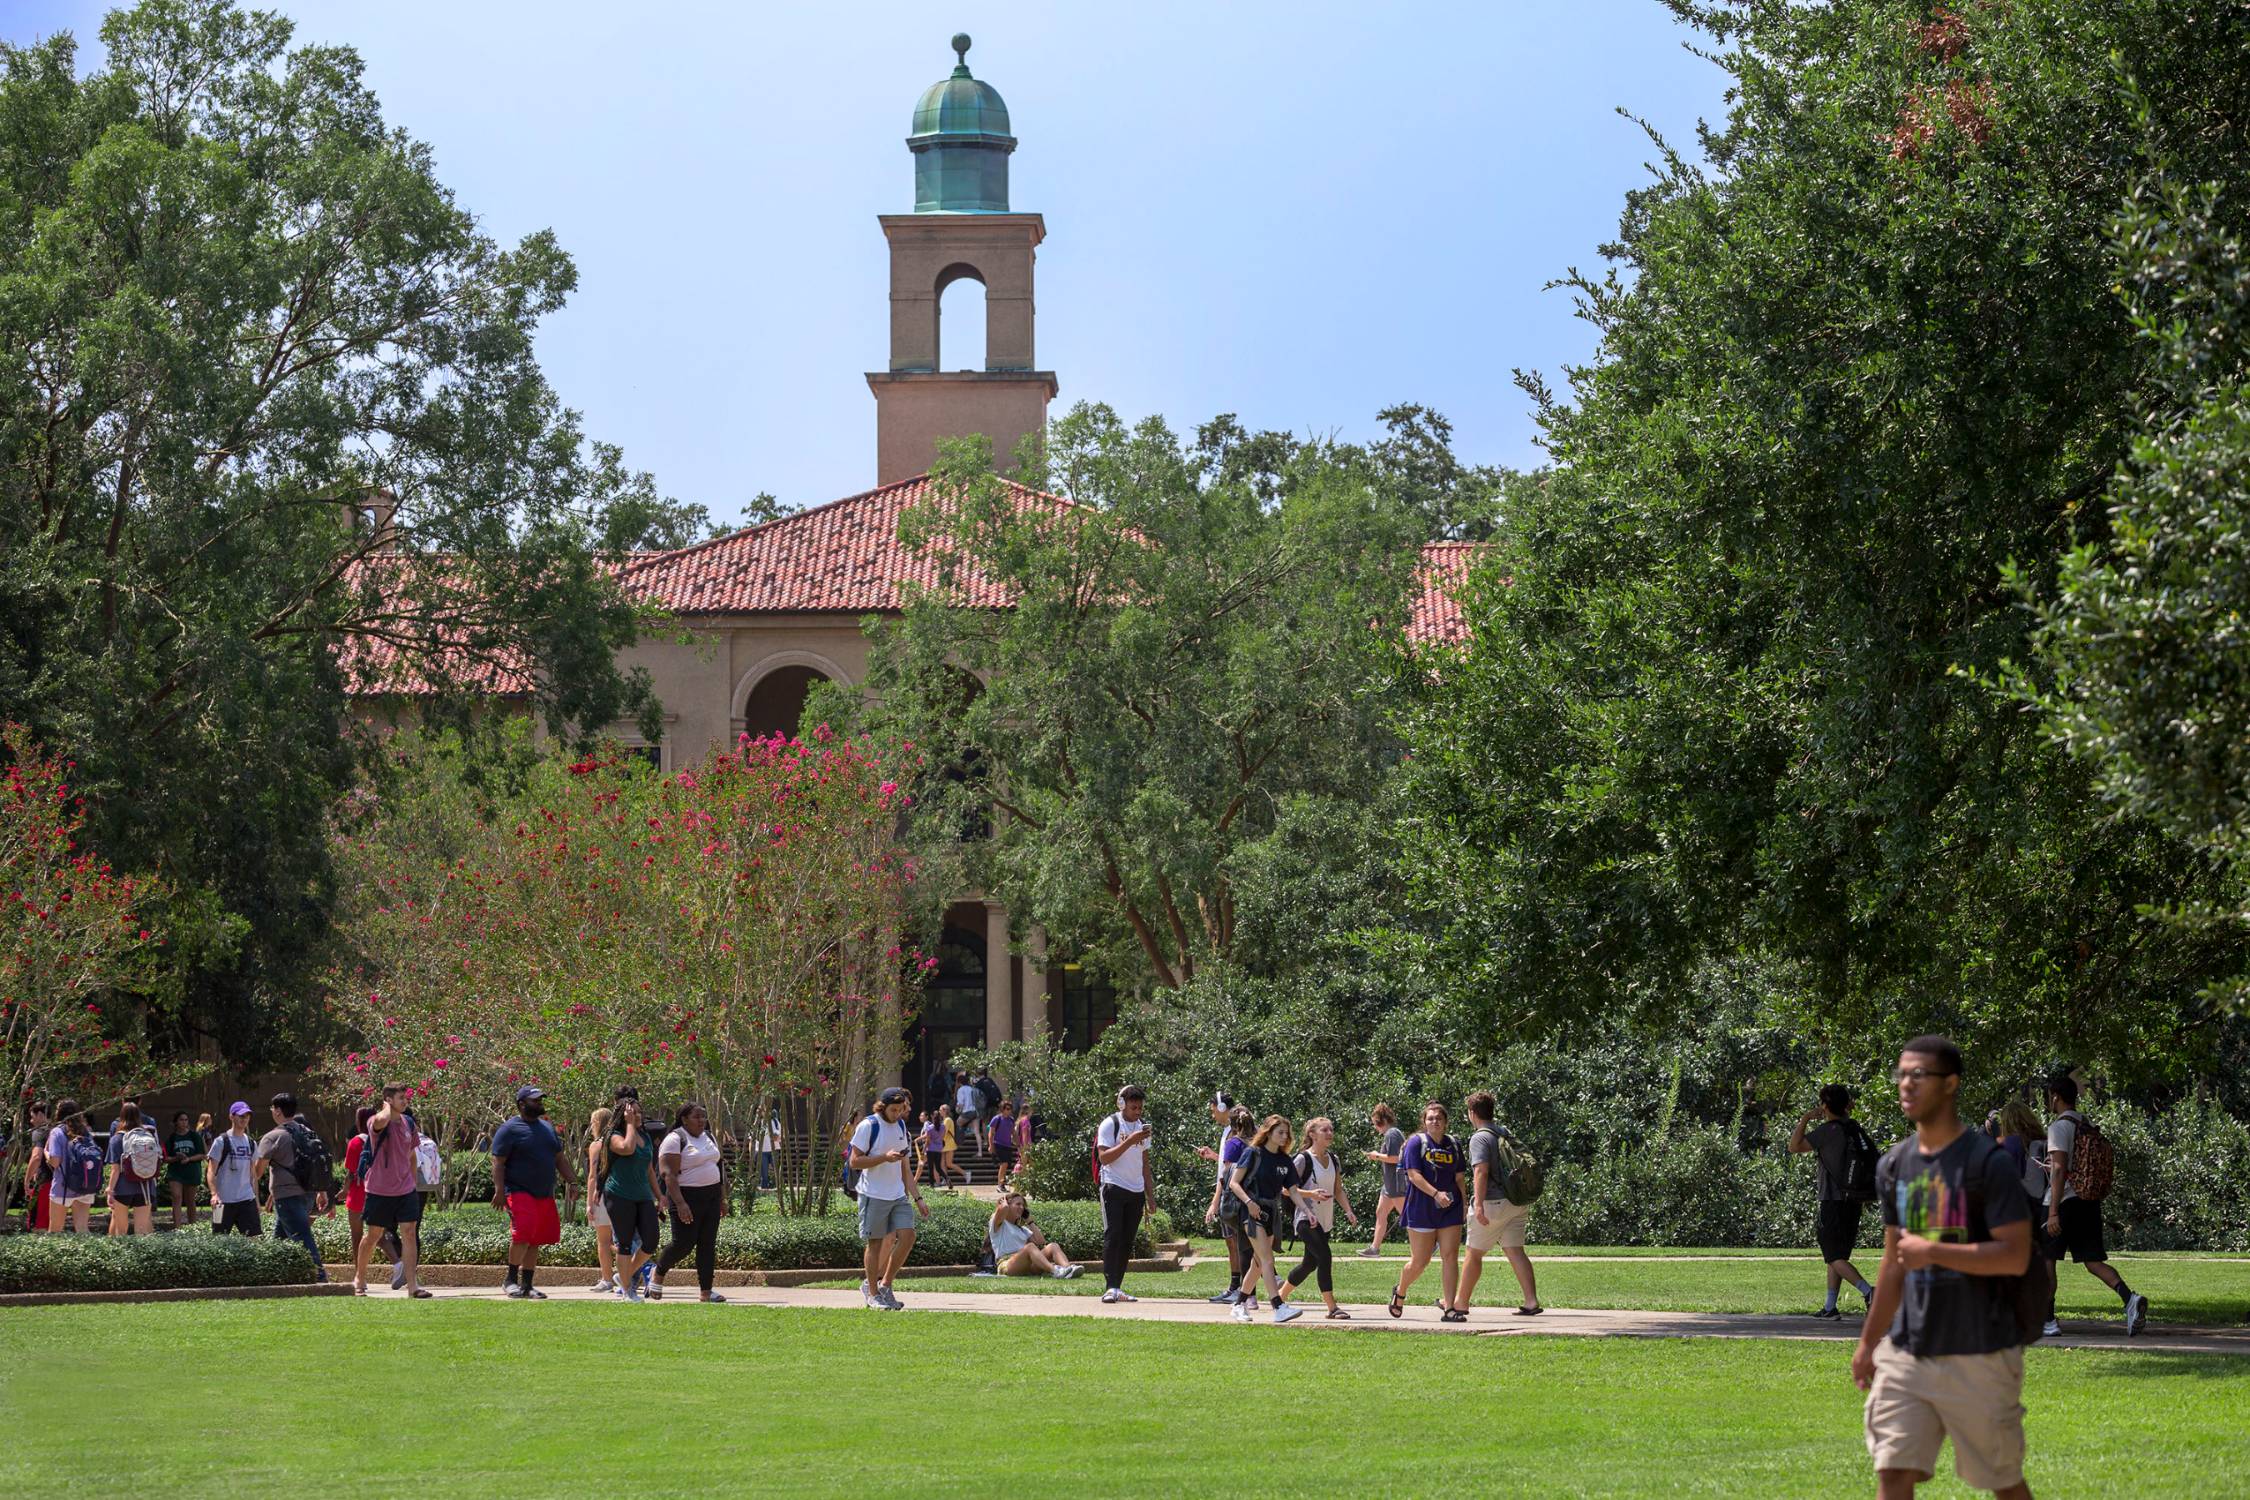 students walking in quad